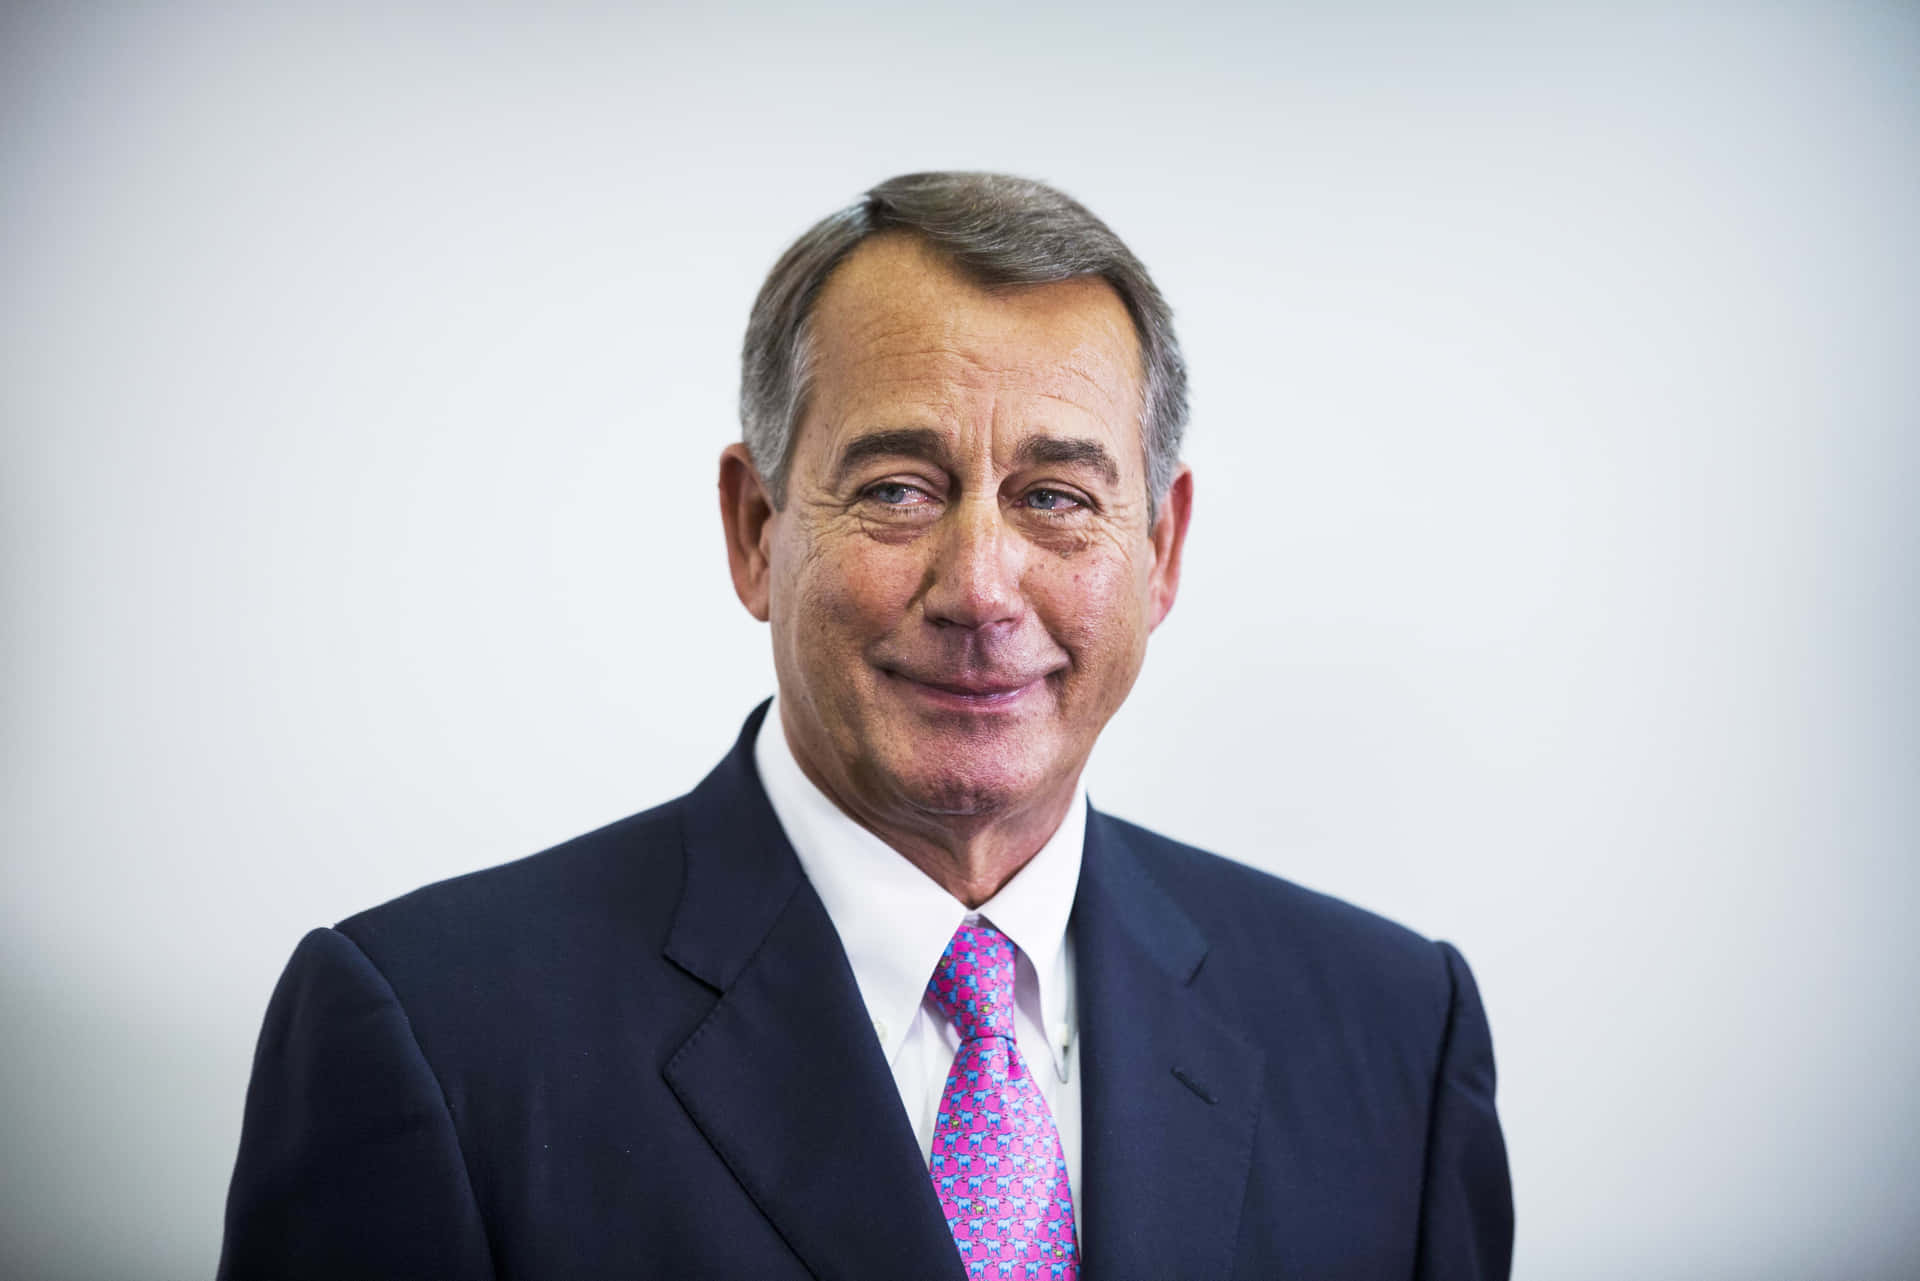 John Boehner Crying With A Smile Wallpaper